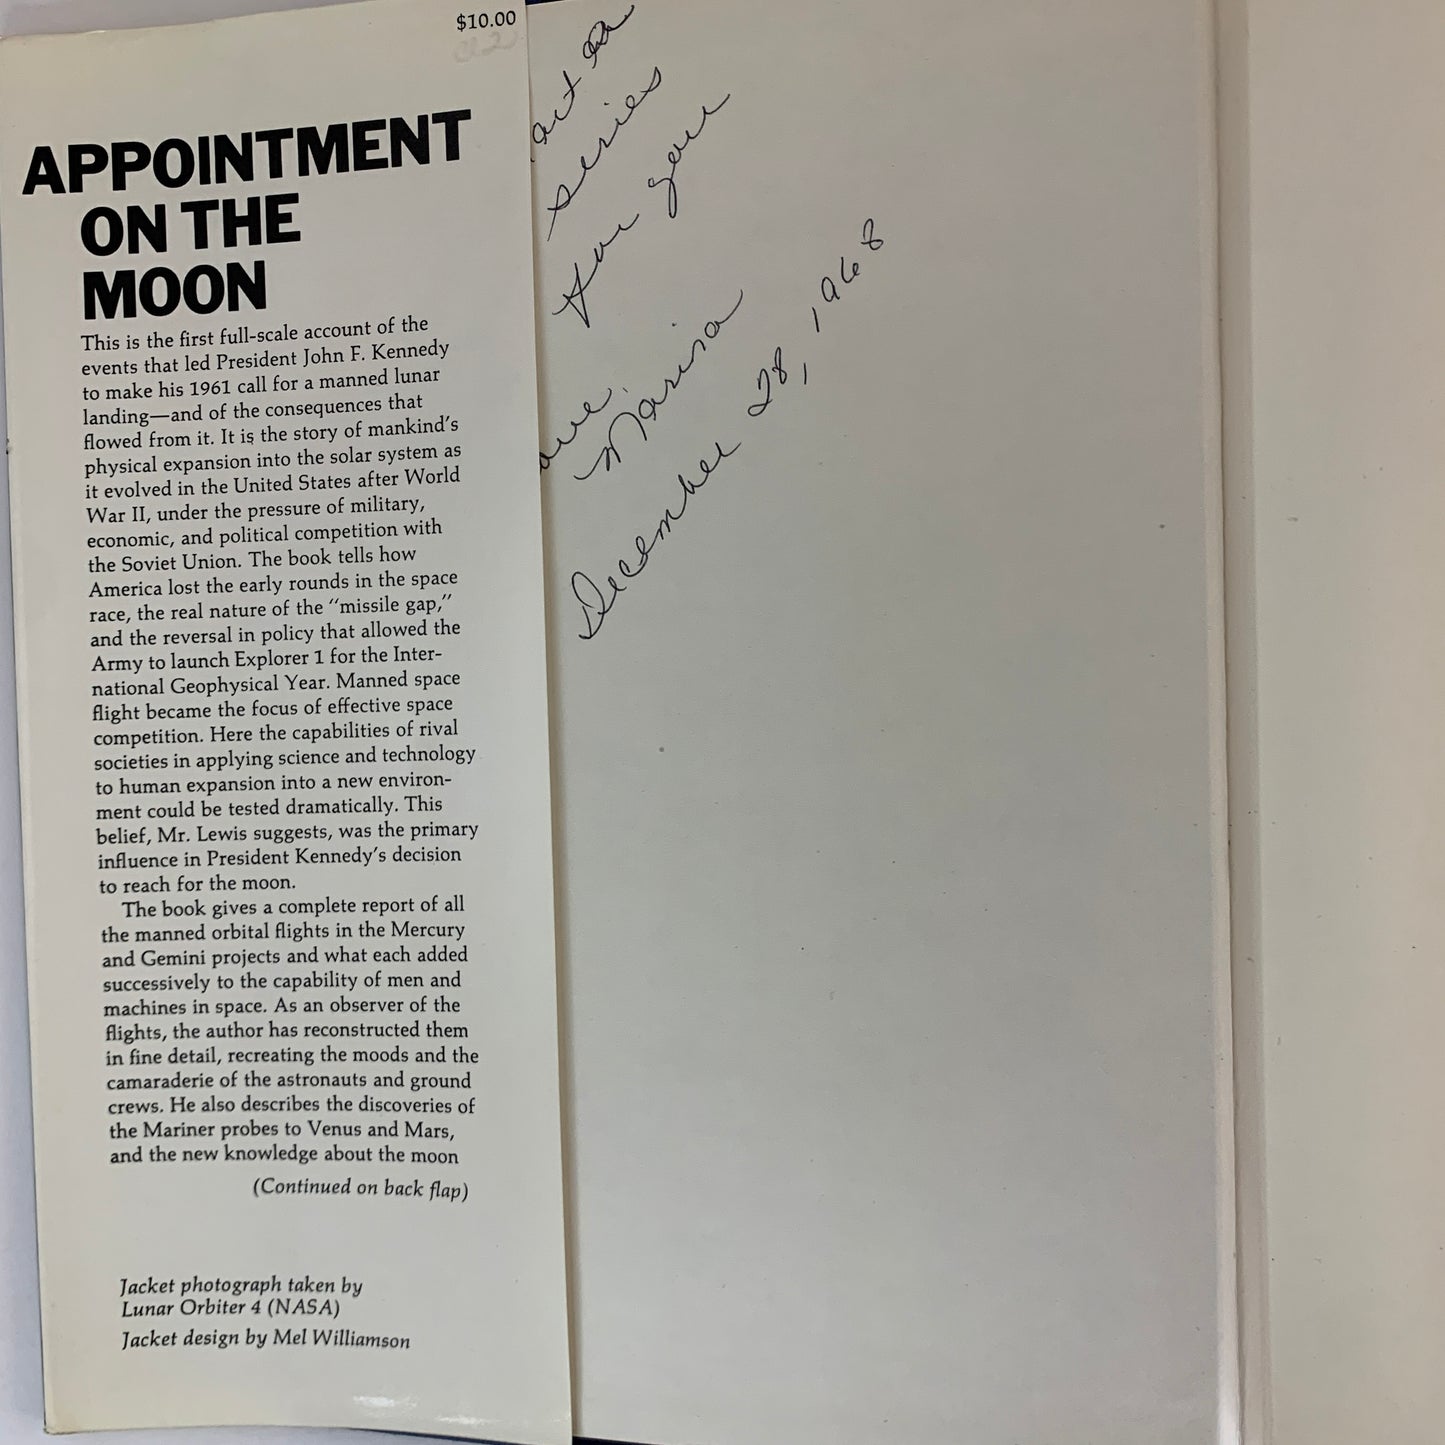 Appointment on the Moon